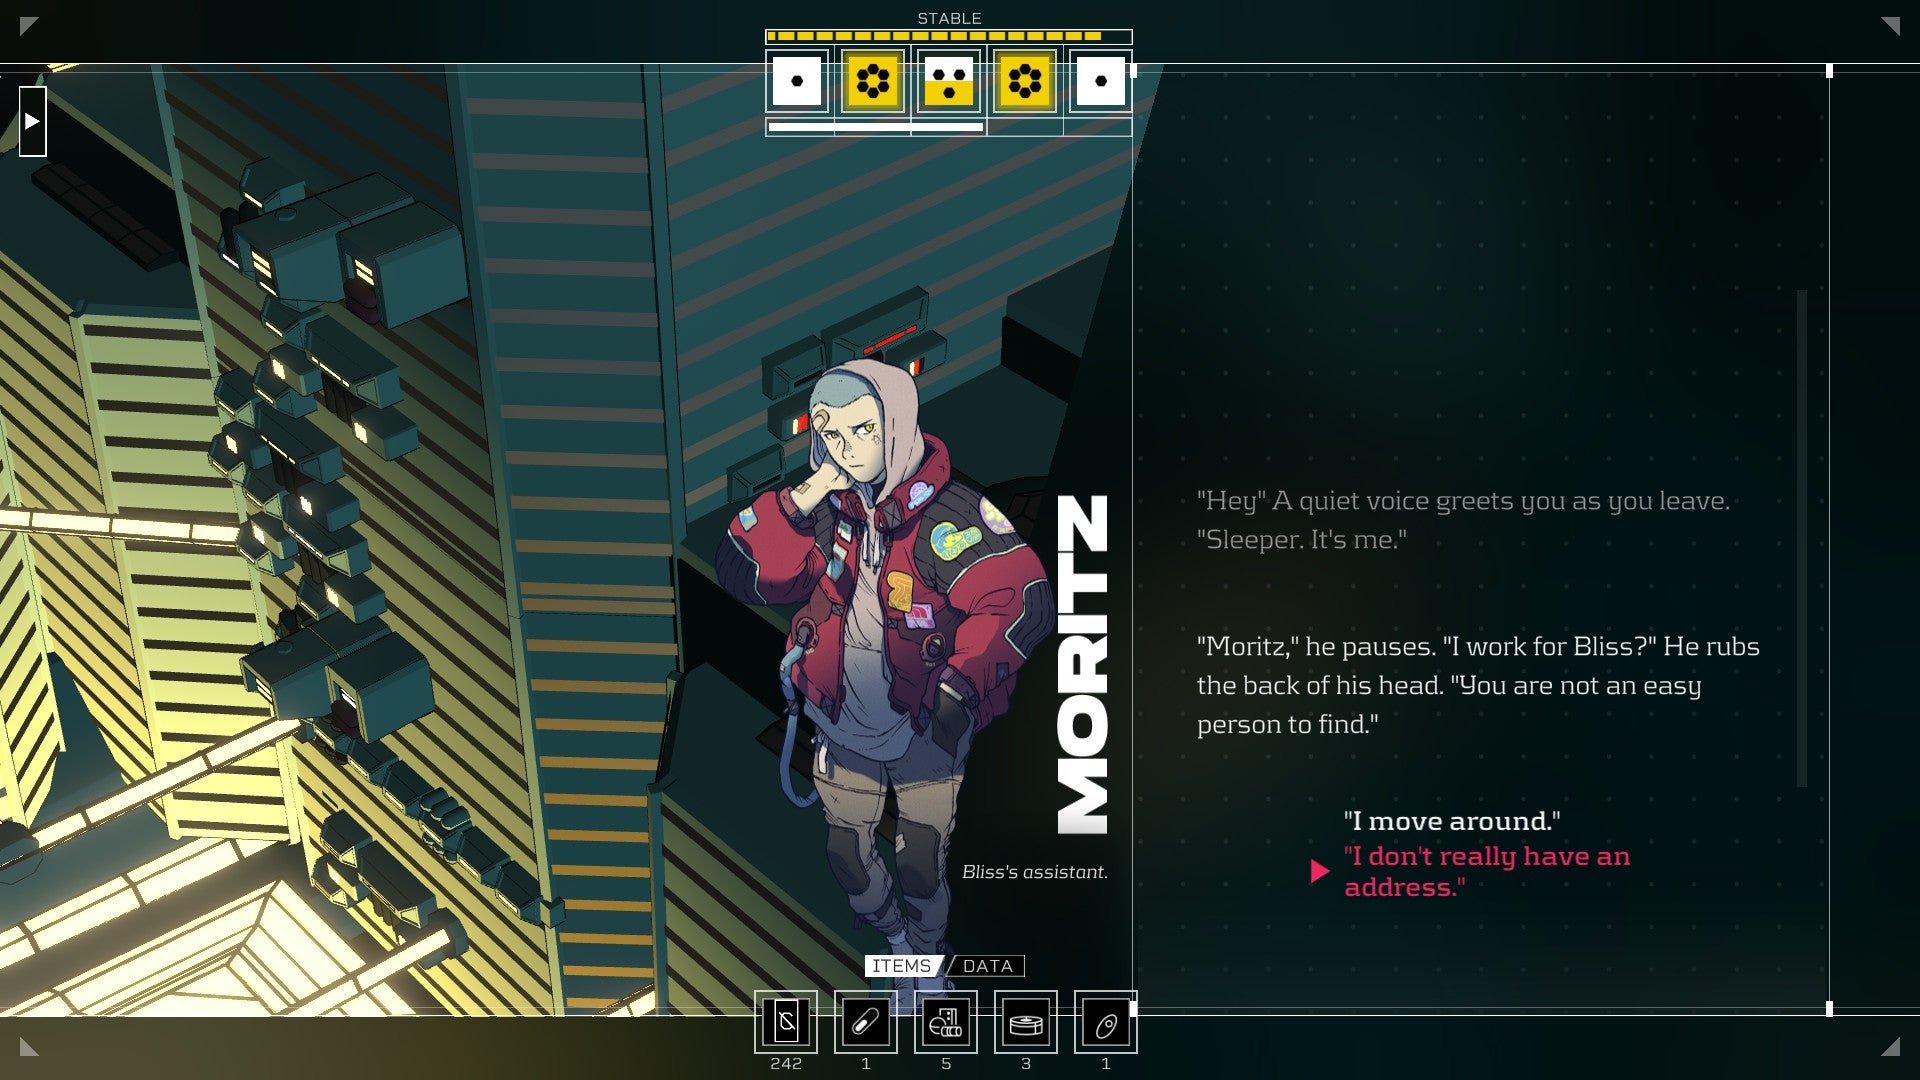 Citizen Sleeper review - dialogue with a shy-looking character called Moritz, art on the left, dialogue on the right, discussing where you live, you opt to say "I don't really have an address."